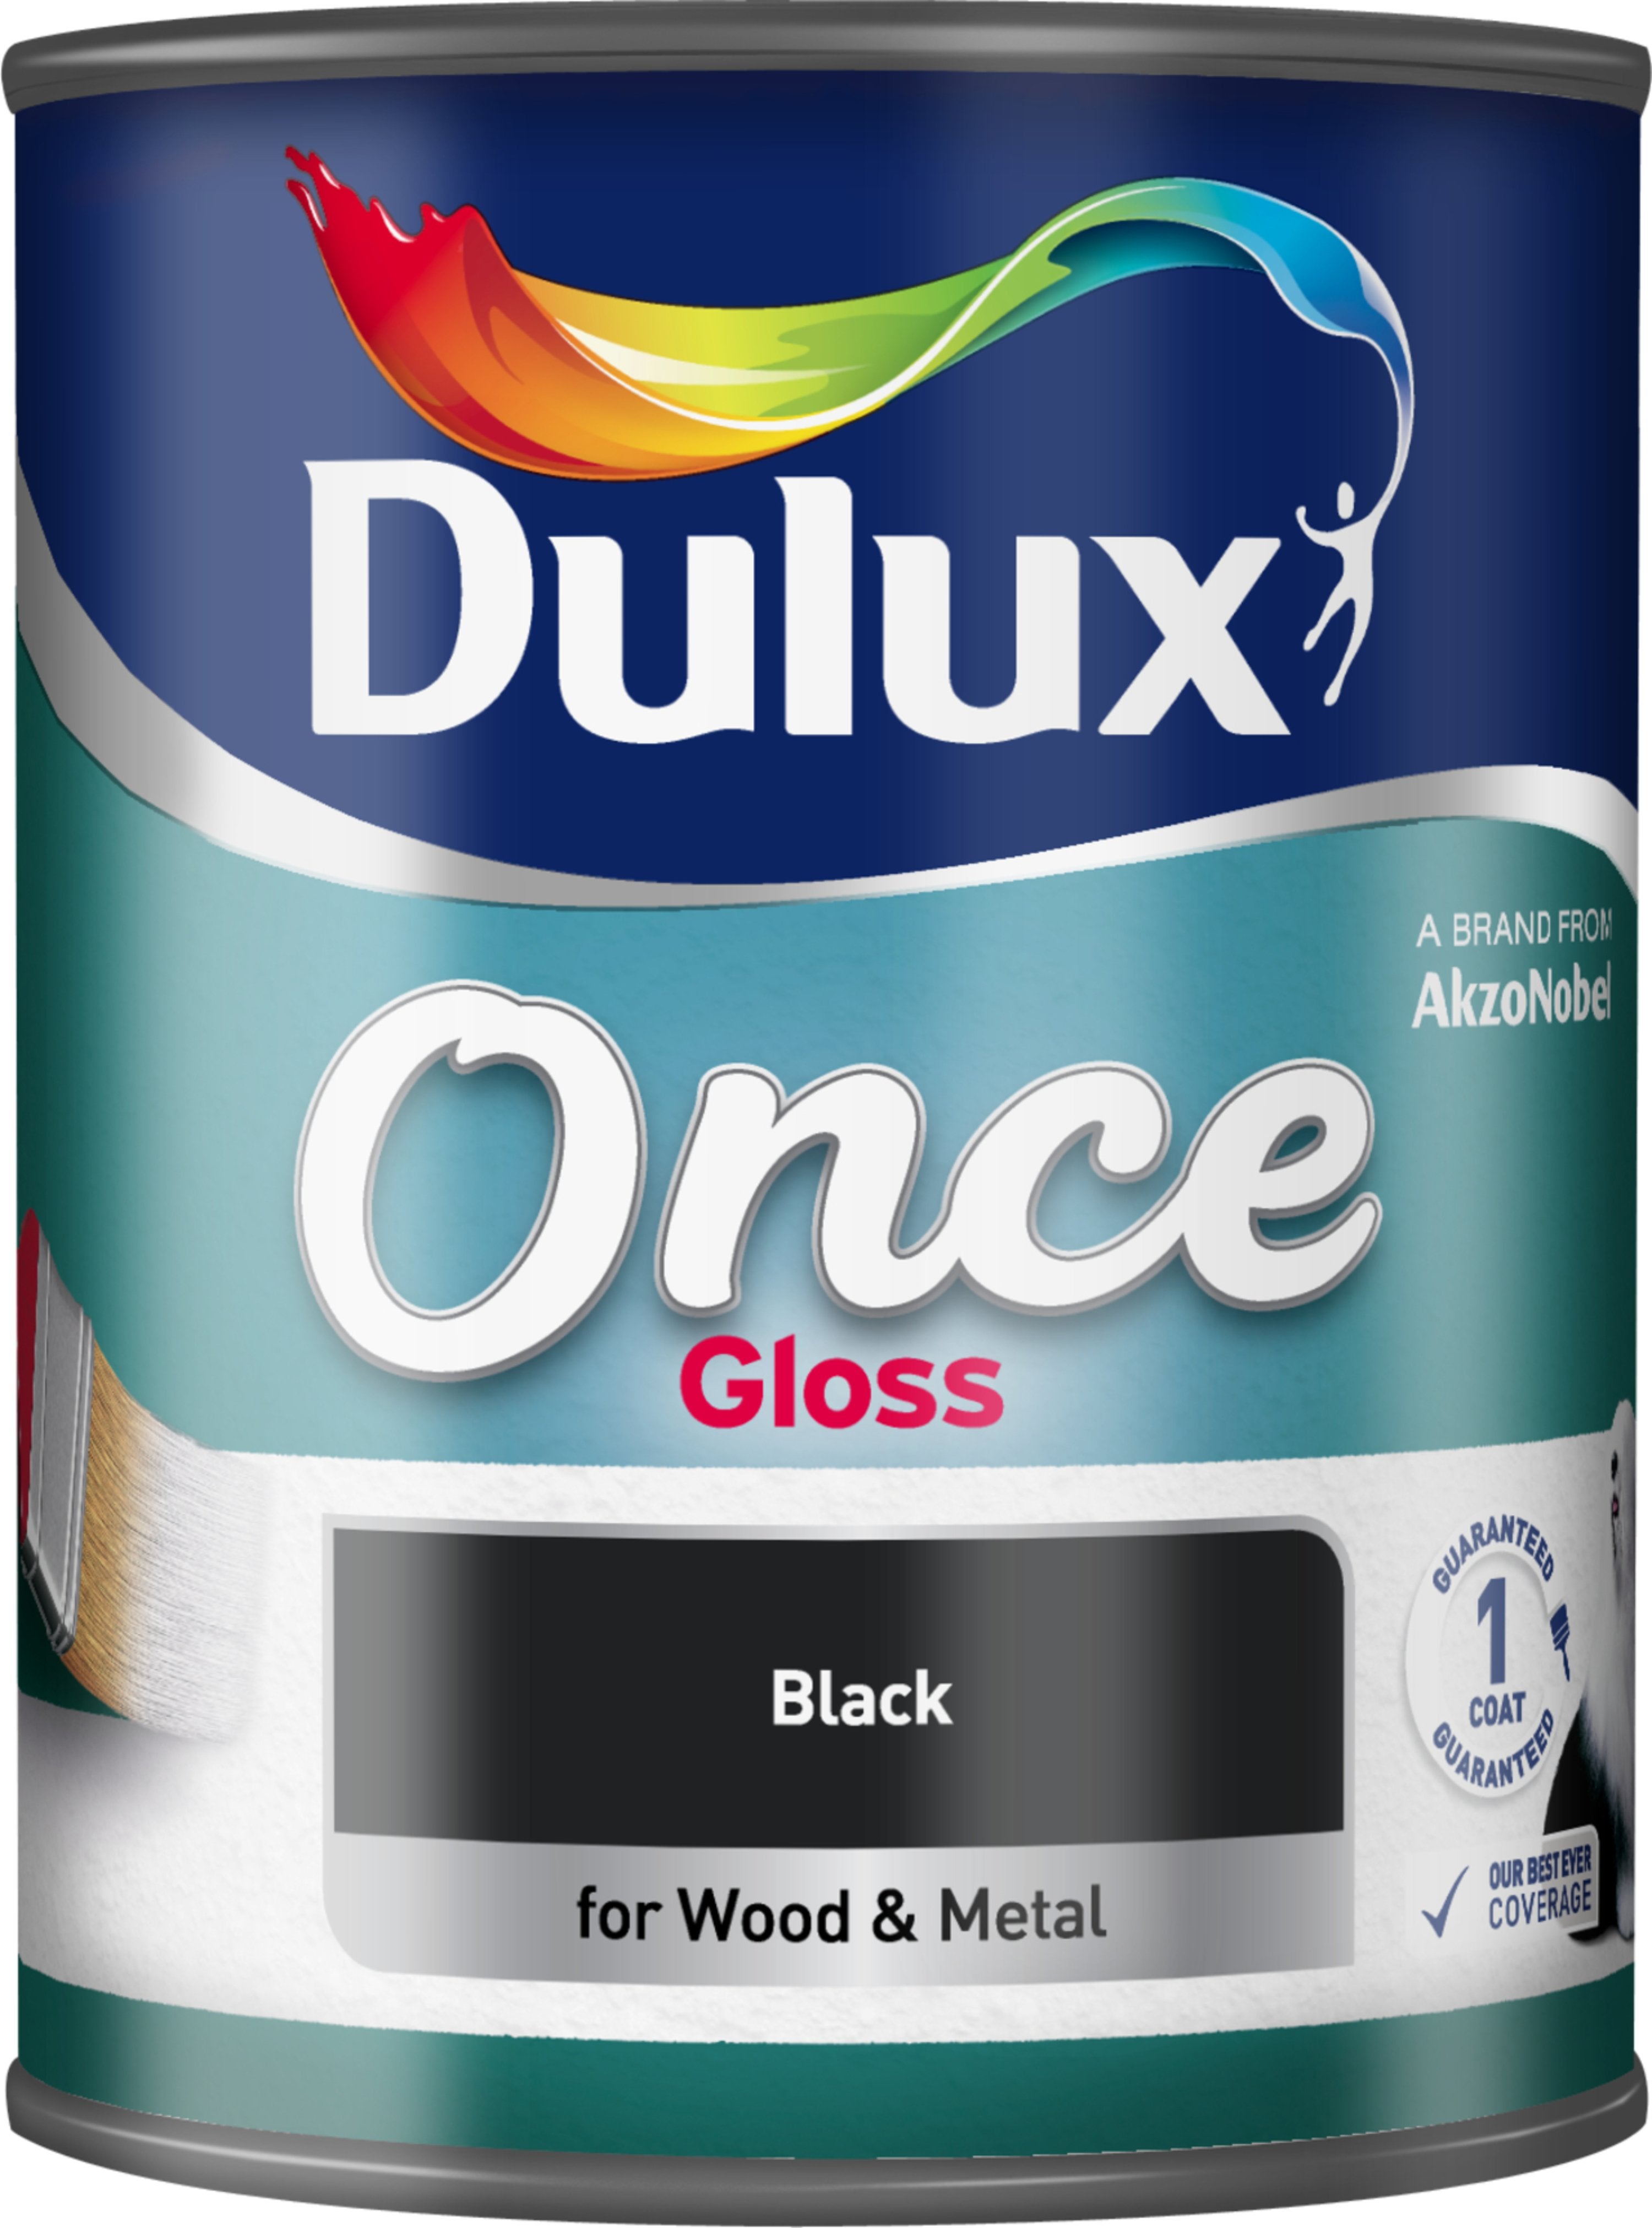 Dulux-Once-Gloss-Paint-For-Wood-And-Metal-Black-750ml